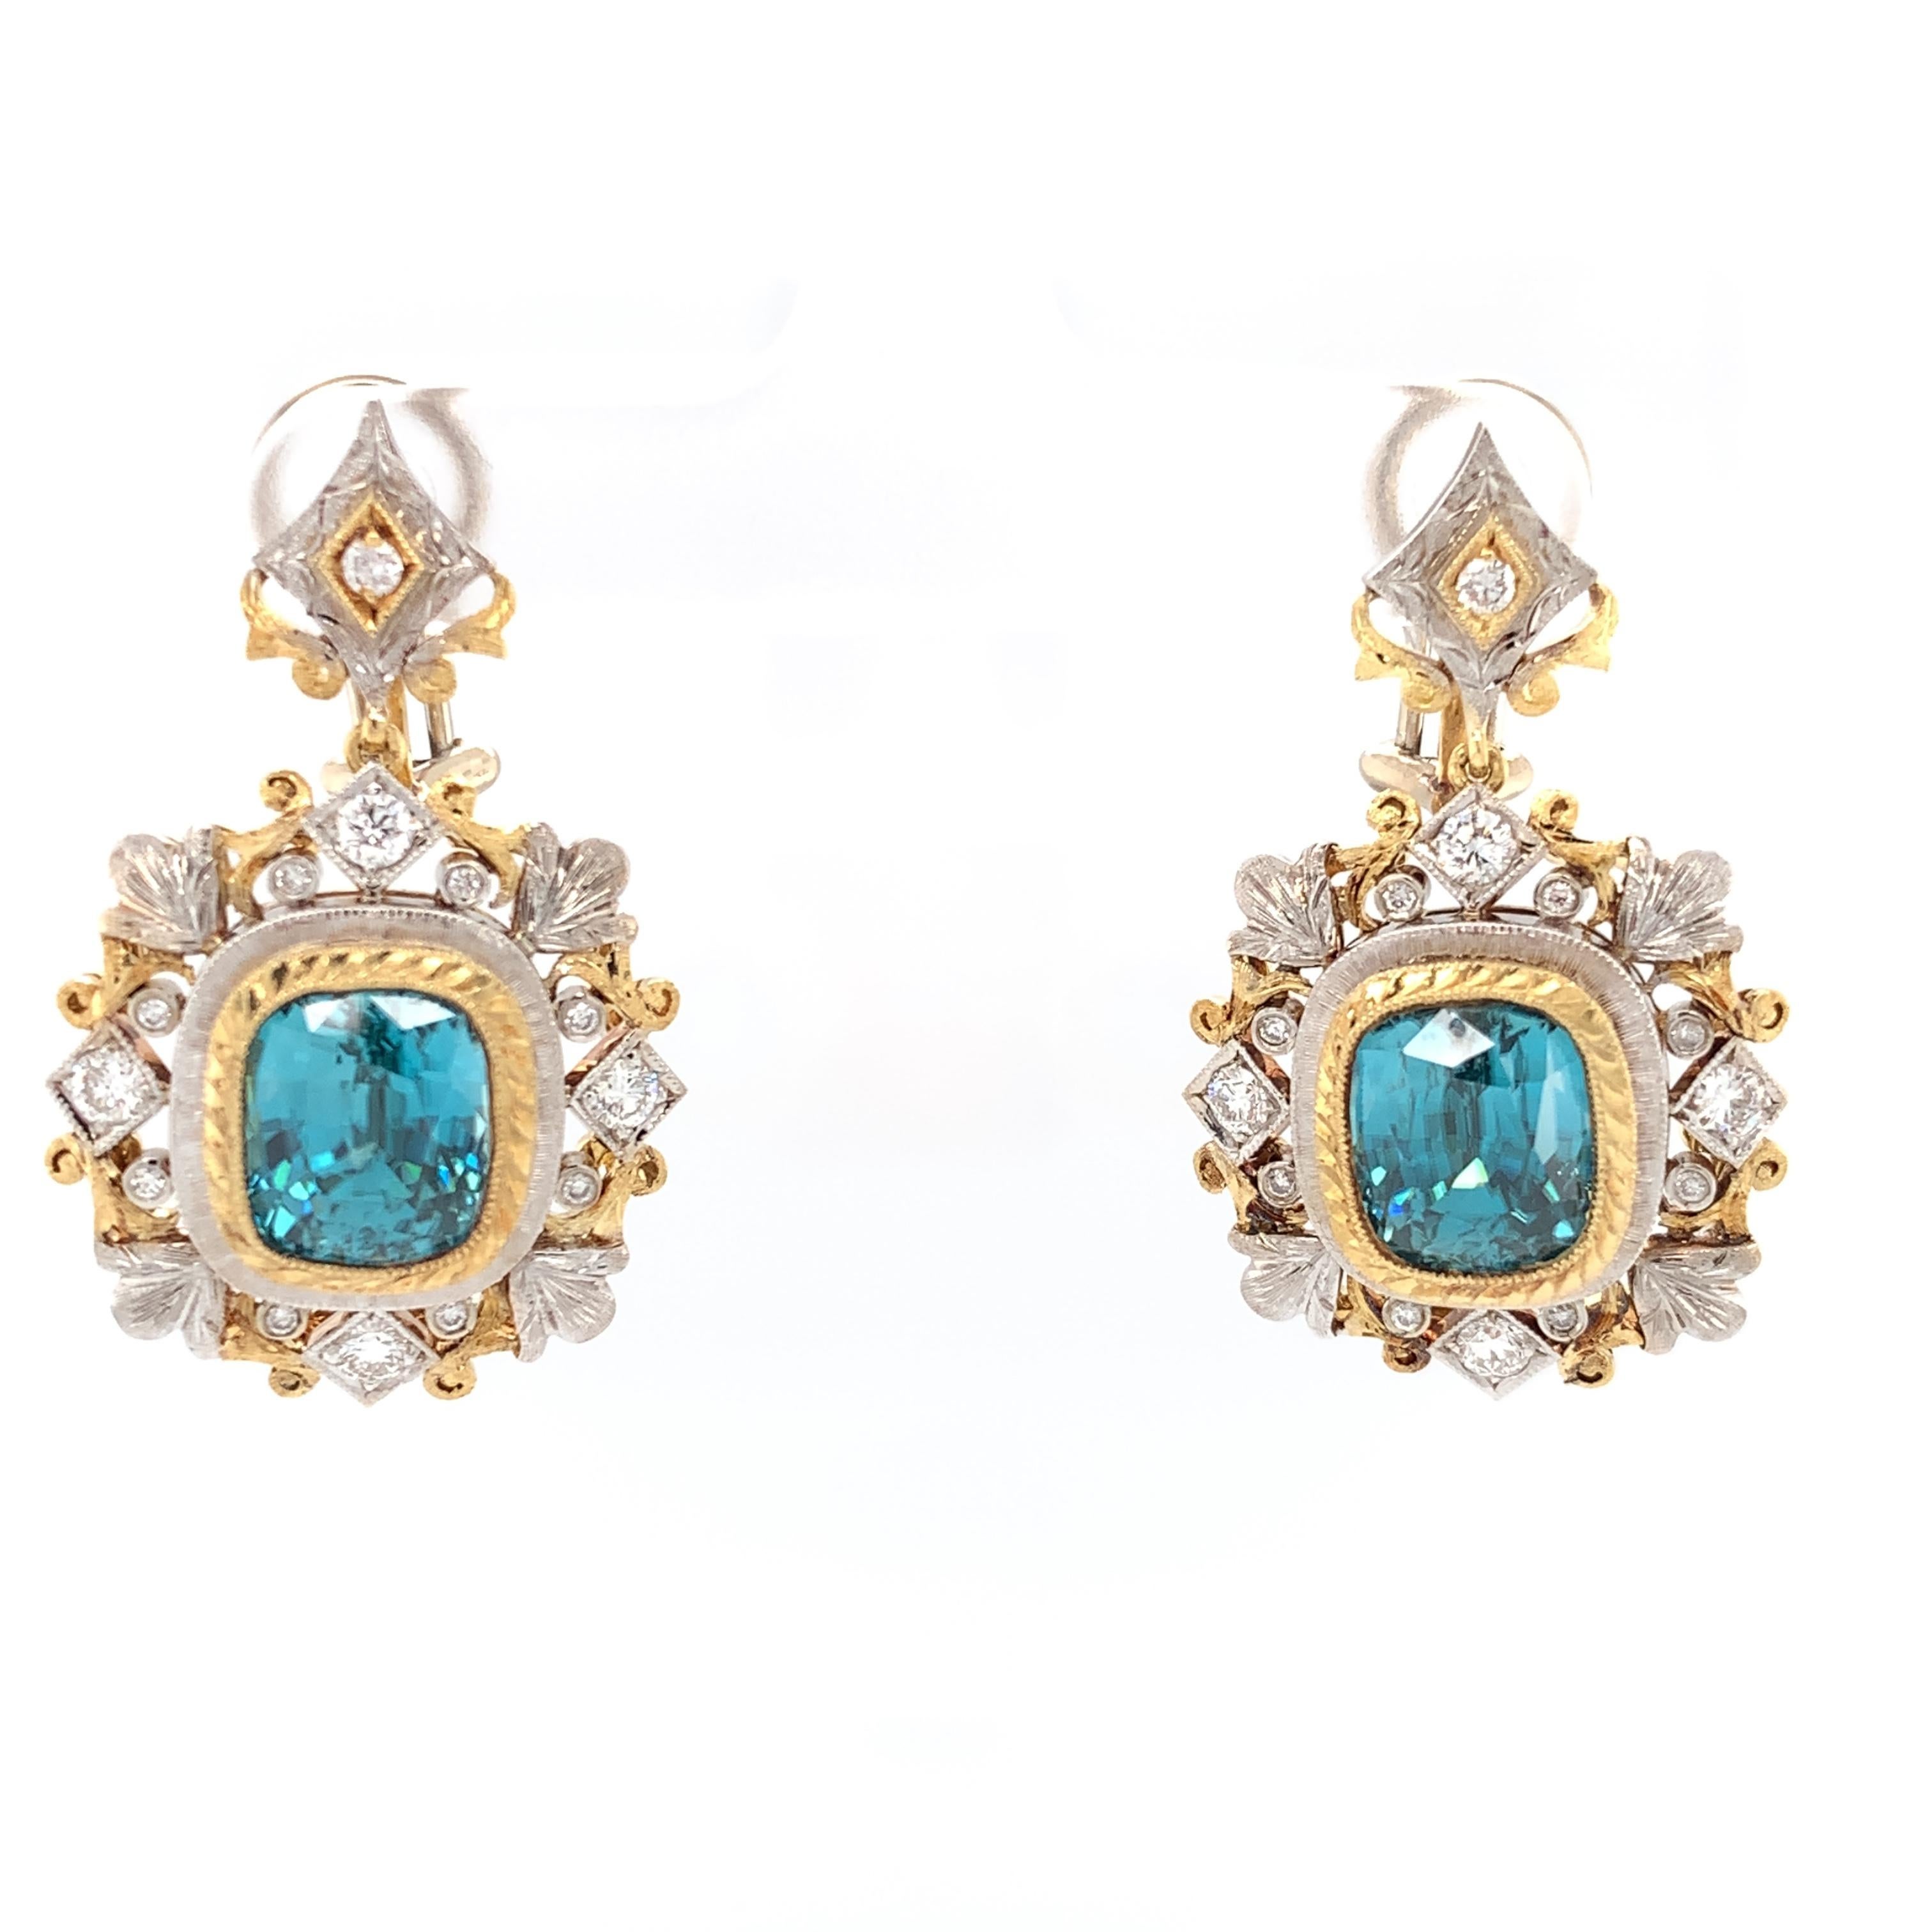 These magnificently handcrafted blue zircon and diamond earrings are breathtaking masterpieces. Blue zircon has been prized since Victorian times for its beautiful color and captivating brilliance. This perfectly matched pair of cushion-cut blue